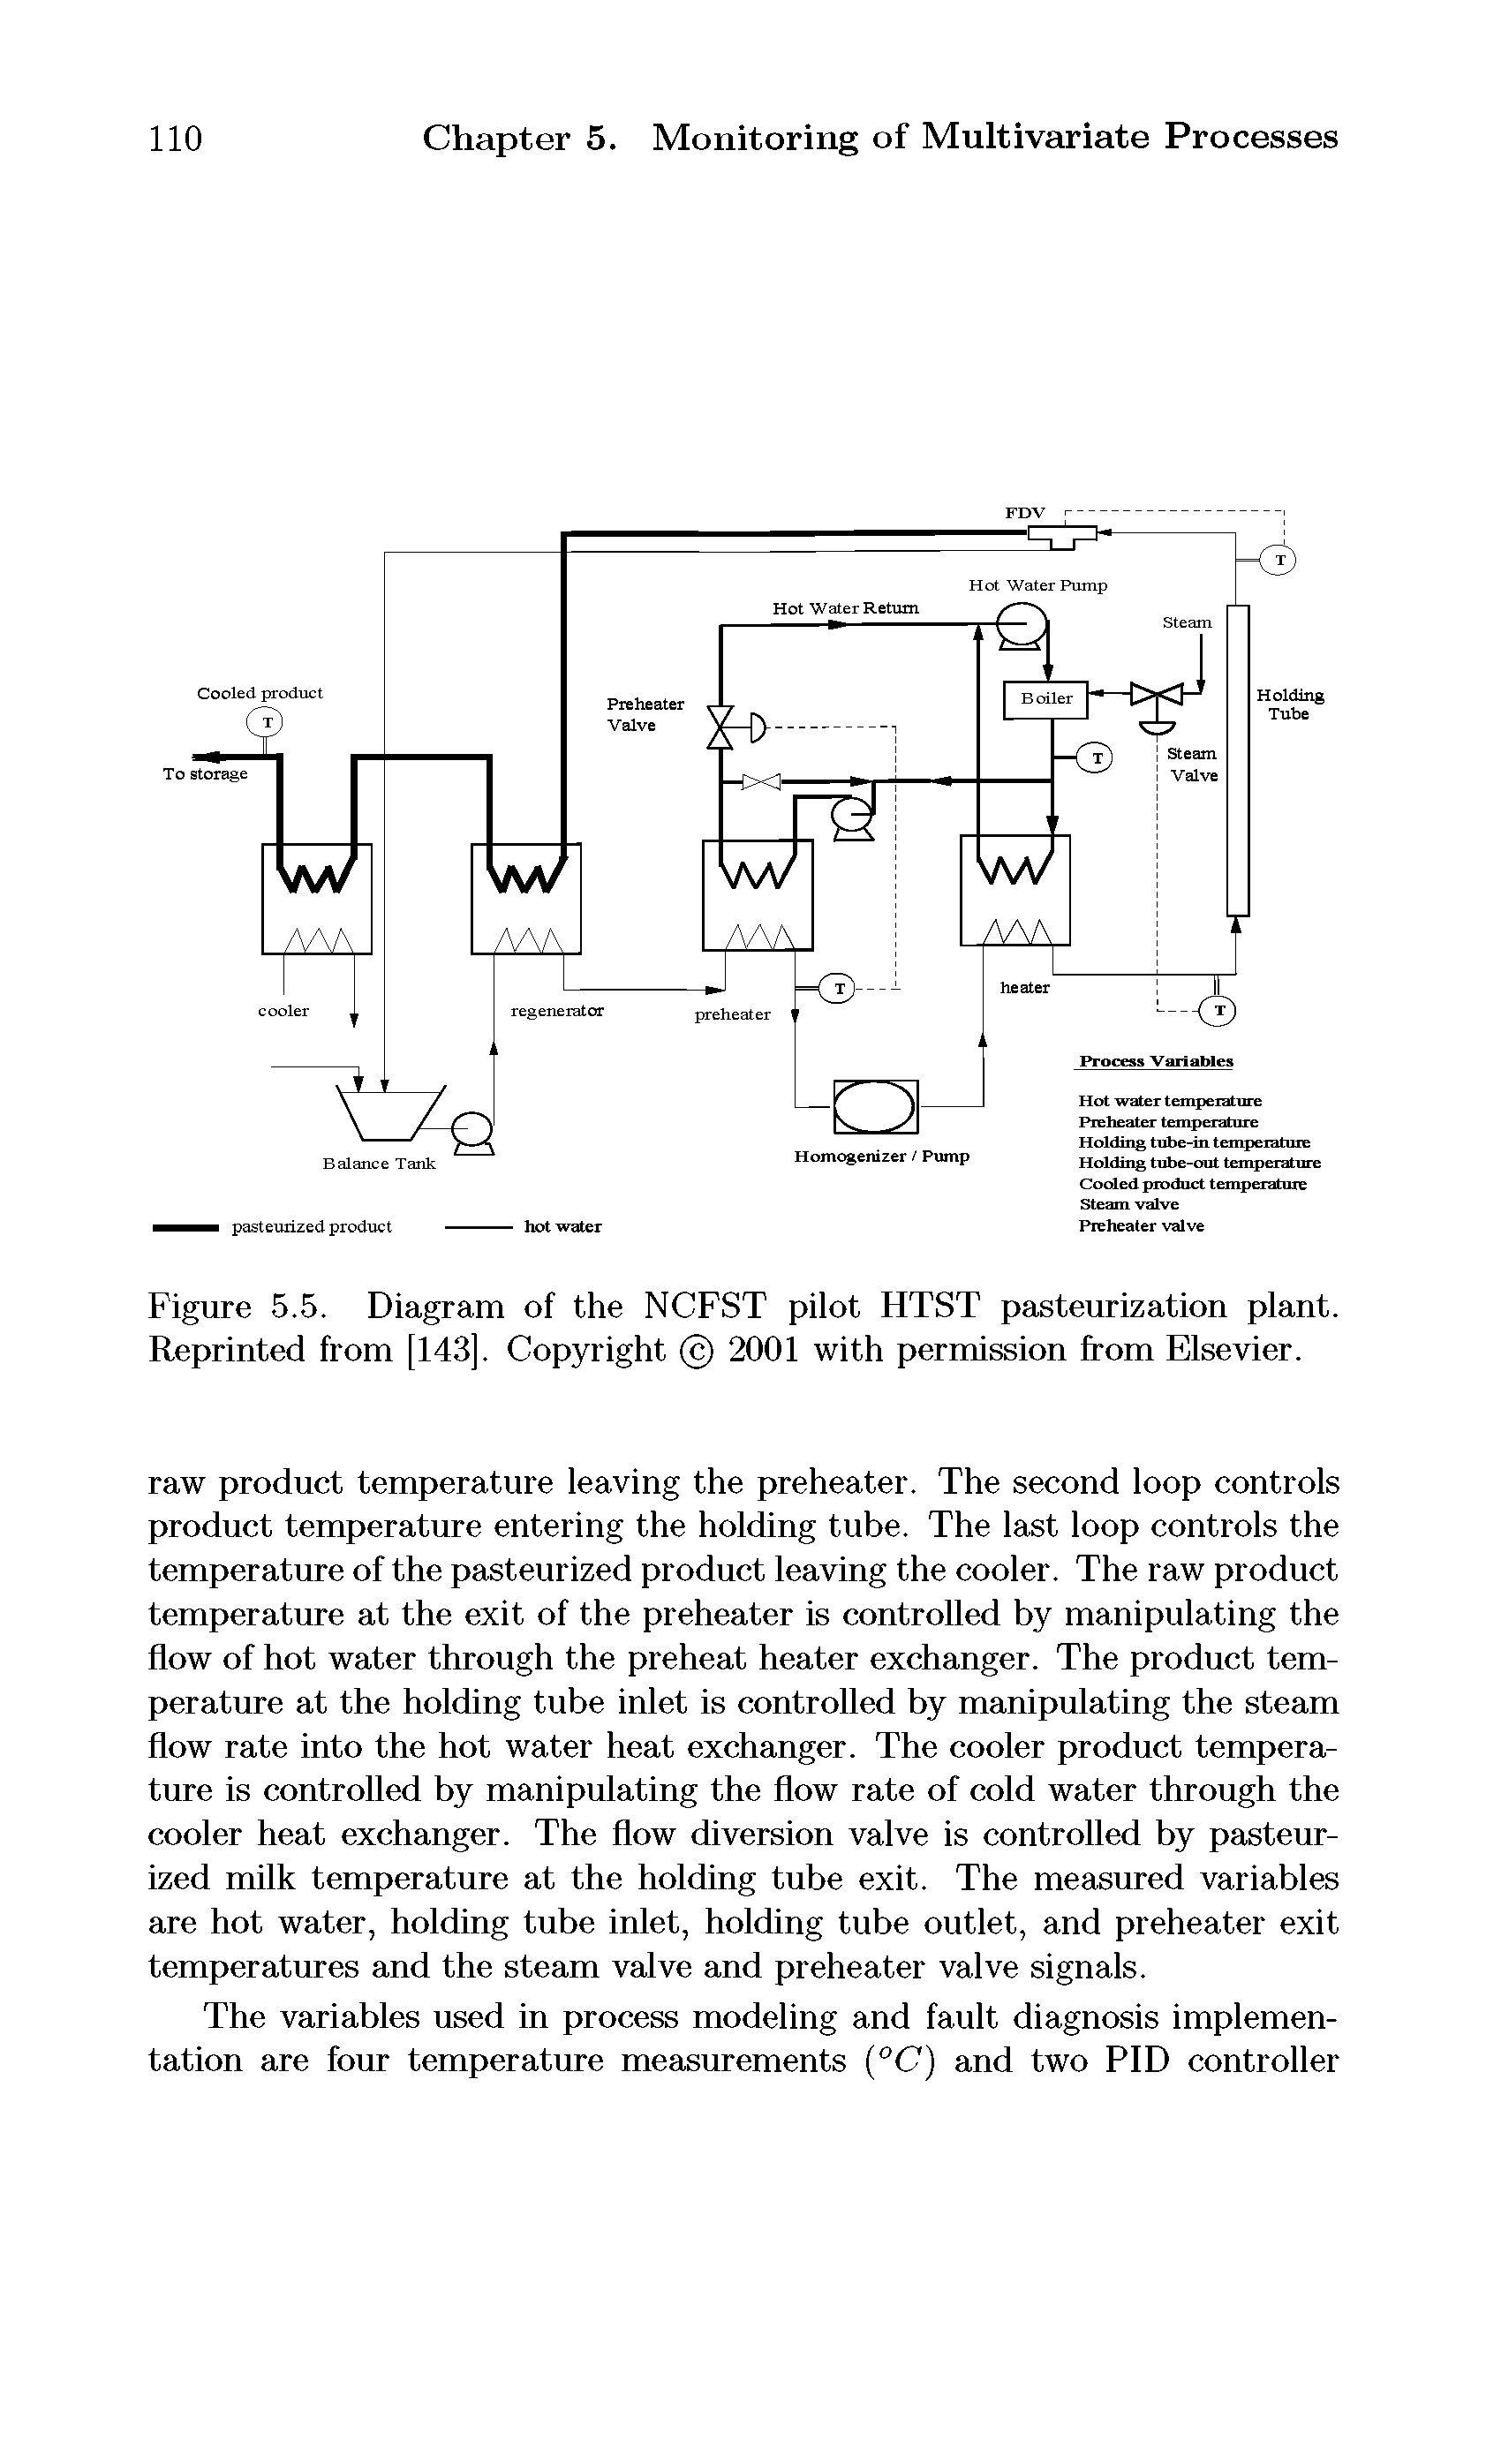 Figure 5.5. Diagram of the NCFST pilot HTST pasteurization plant. Reprinted from [143]. Copyright 2001 with permission from Elsevier.